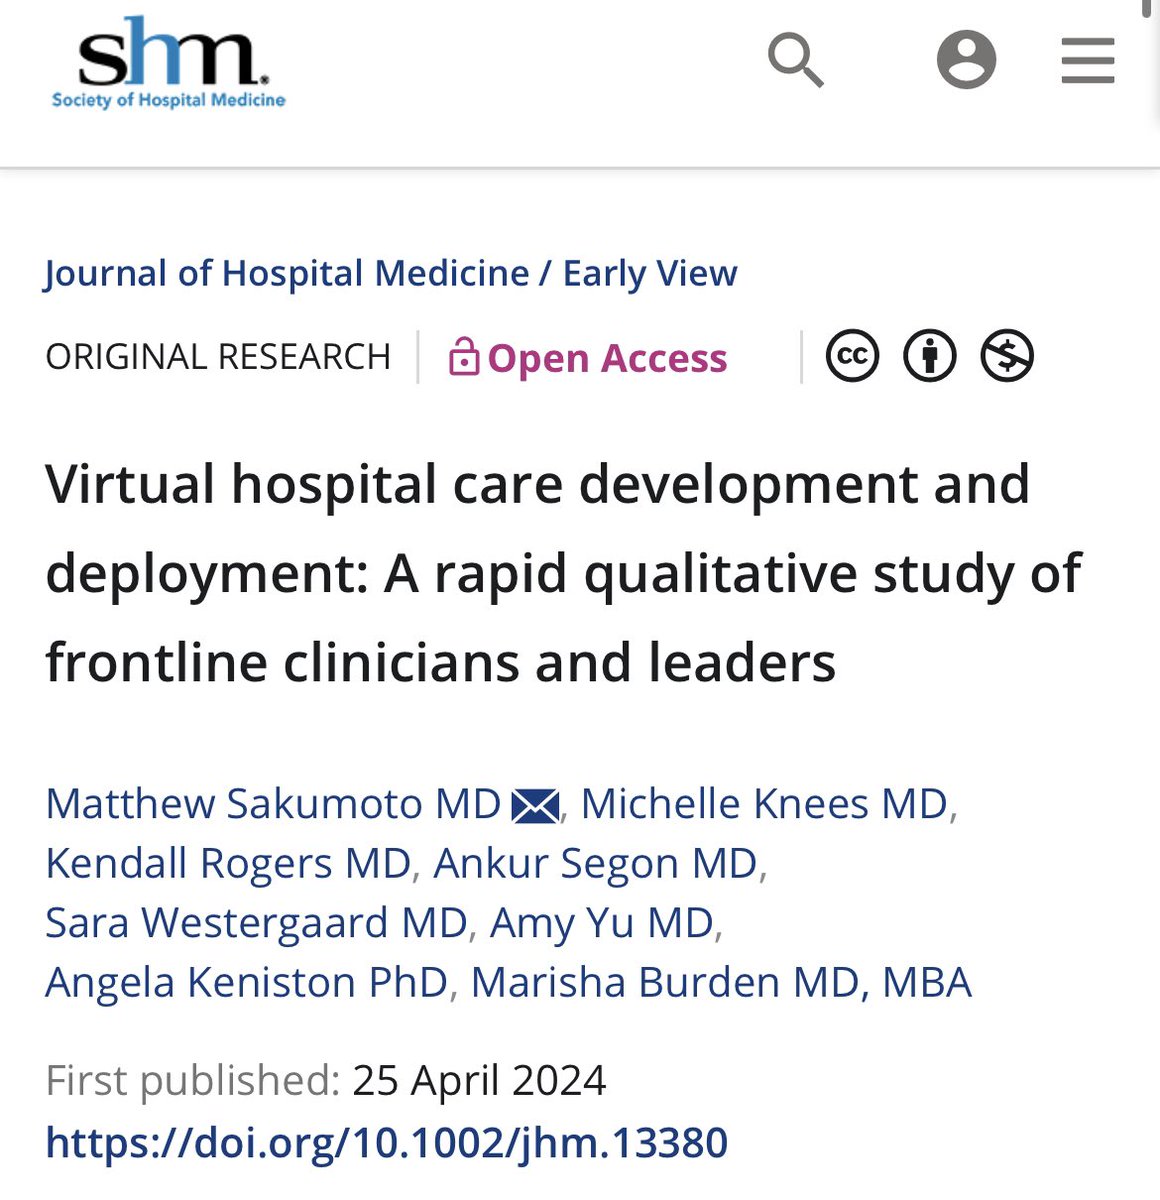 ✍️New Publication! “Virtual Hospital Care Rapid Qualitative Study” out now in @JHospMedicine @SocietyHospMed 

We describe a wide range of deployments with perspectives from multiple frontline hospital medicine leaders

#TelemedNow #HospitalAtHome #Innovation